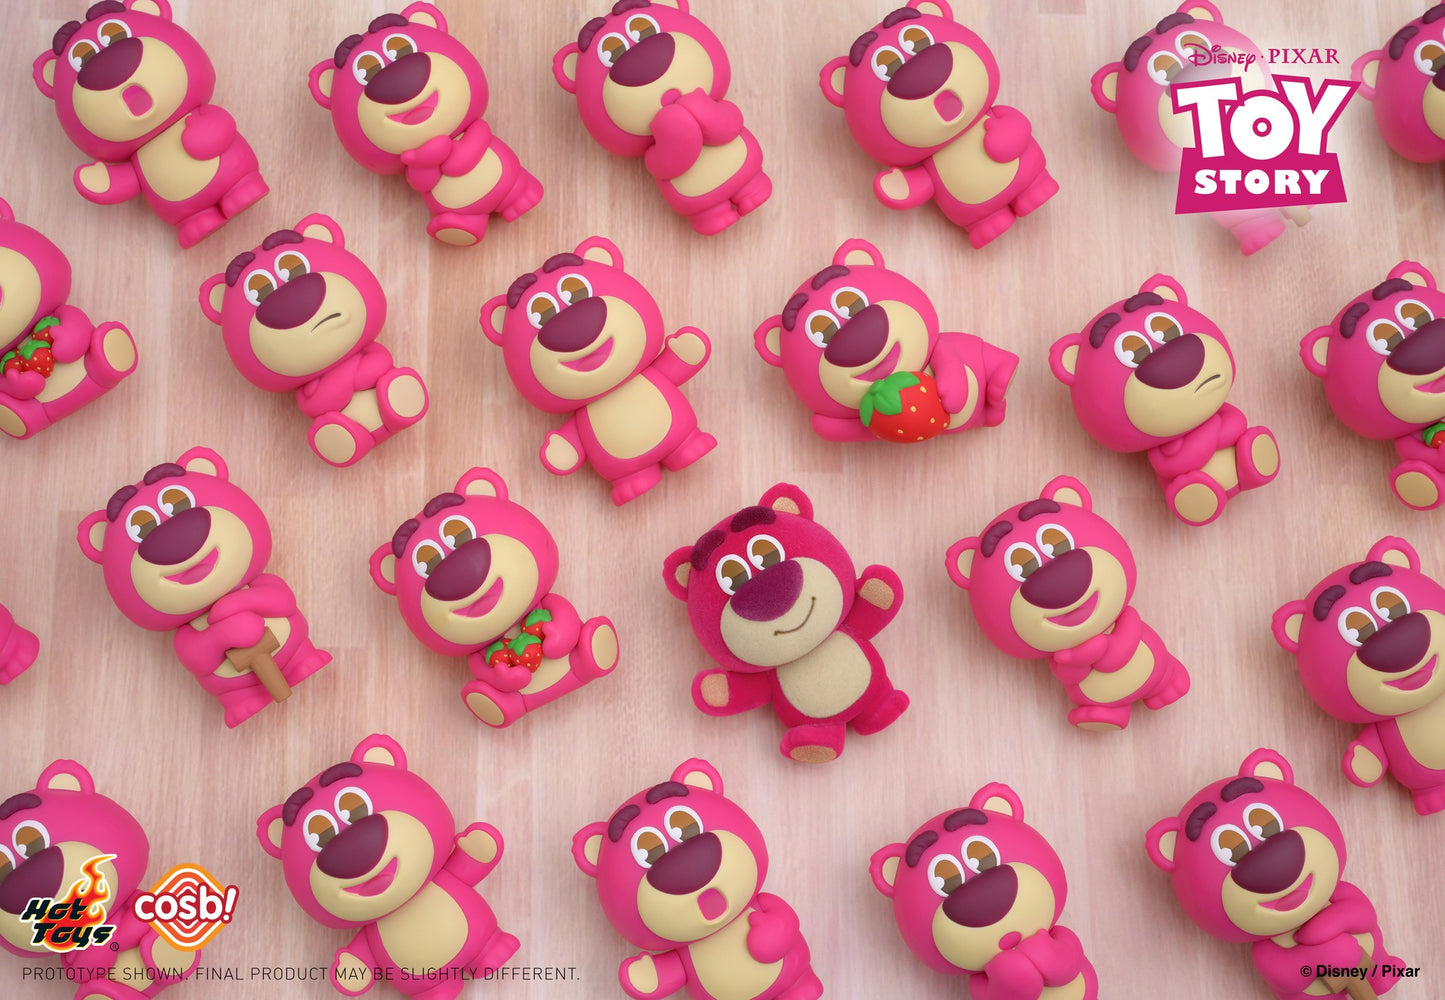 Toy Story - Lotso Cosbi Collection Blind Box by Hot Toys